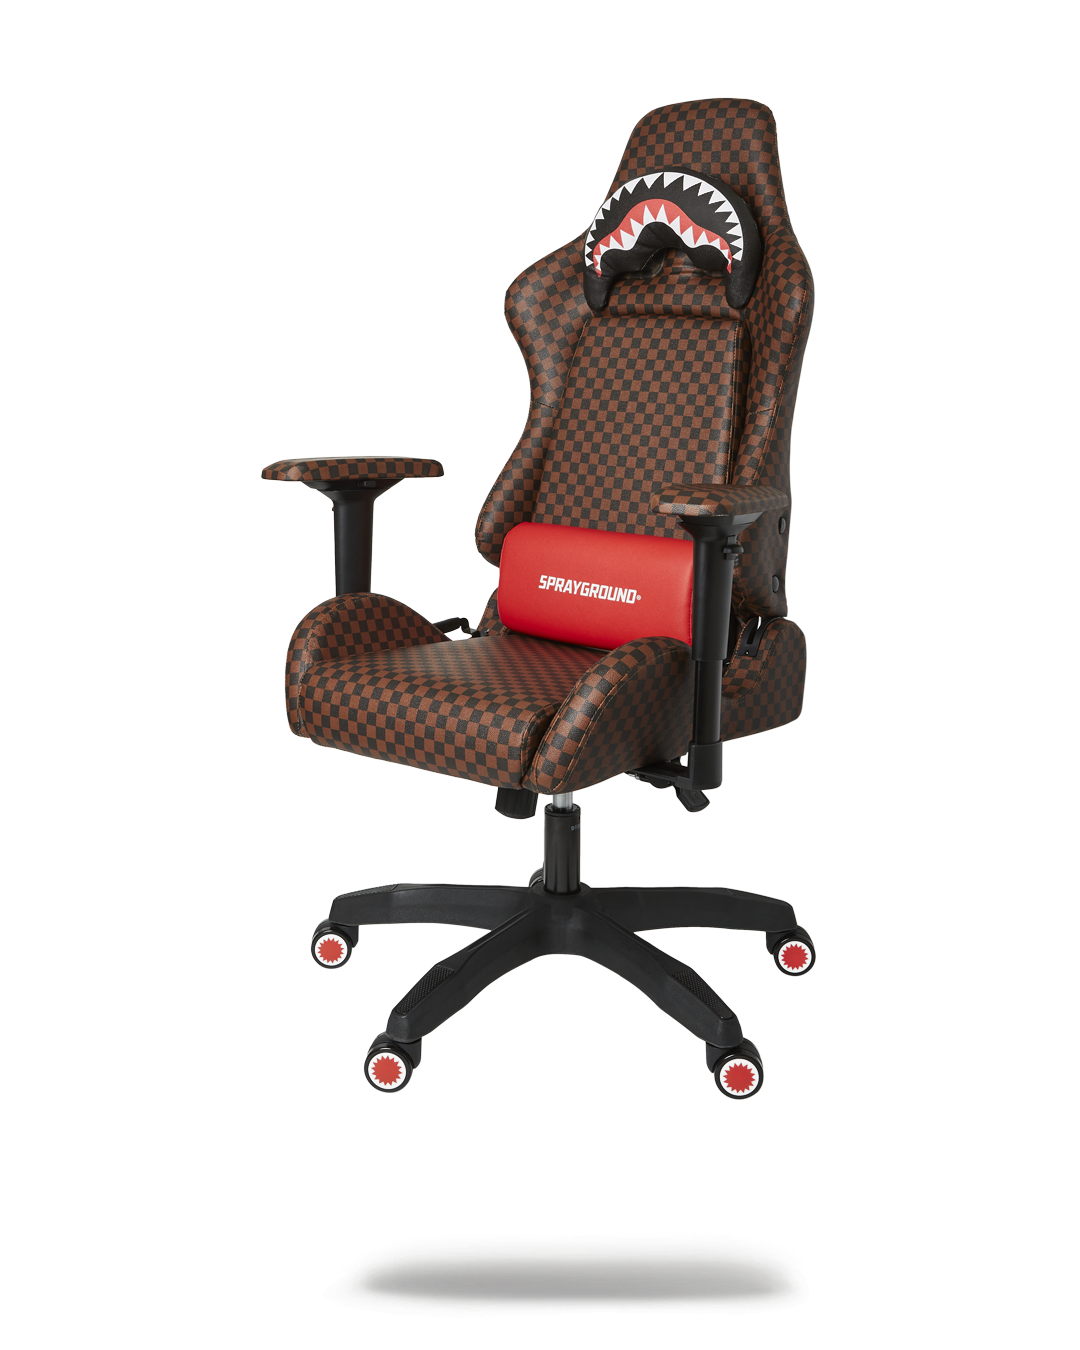 SHARKS IN PARIS GAMING CHAIR